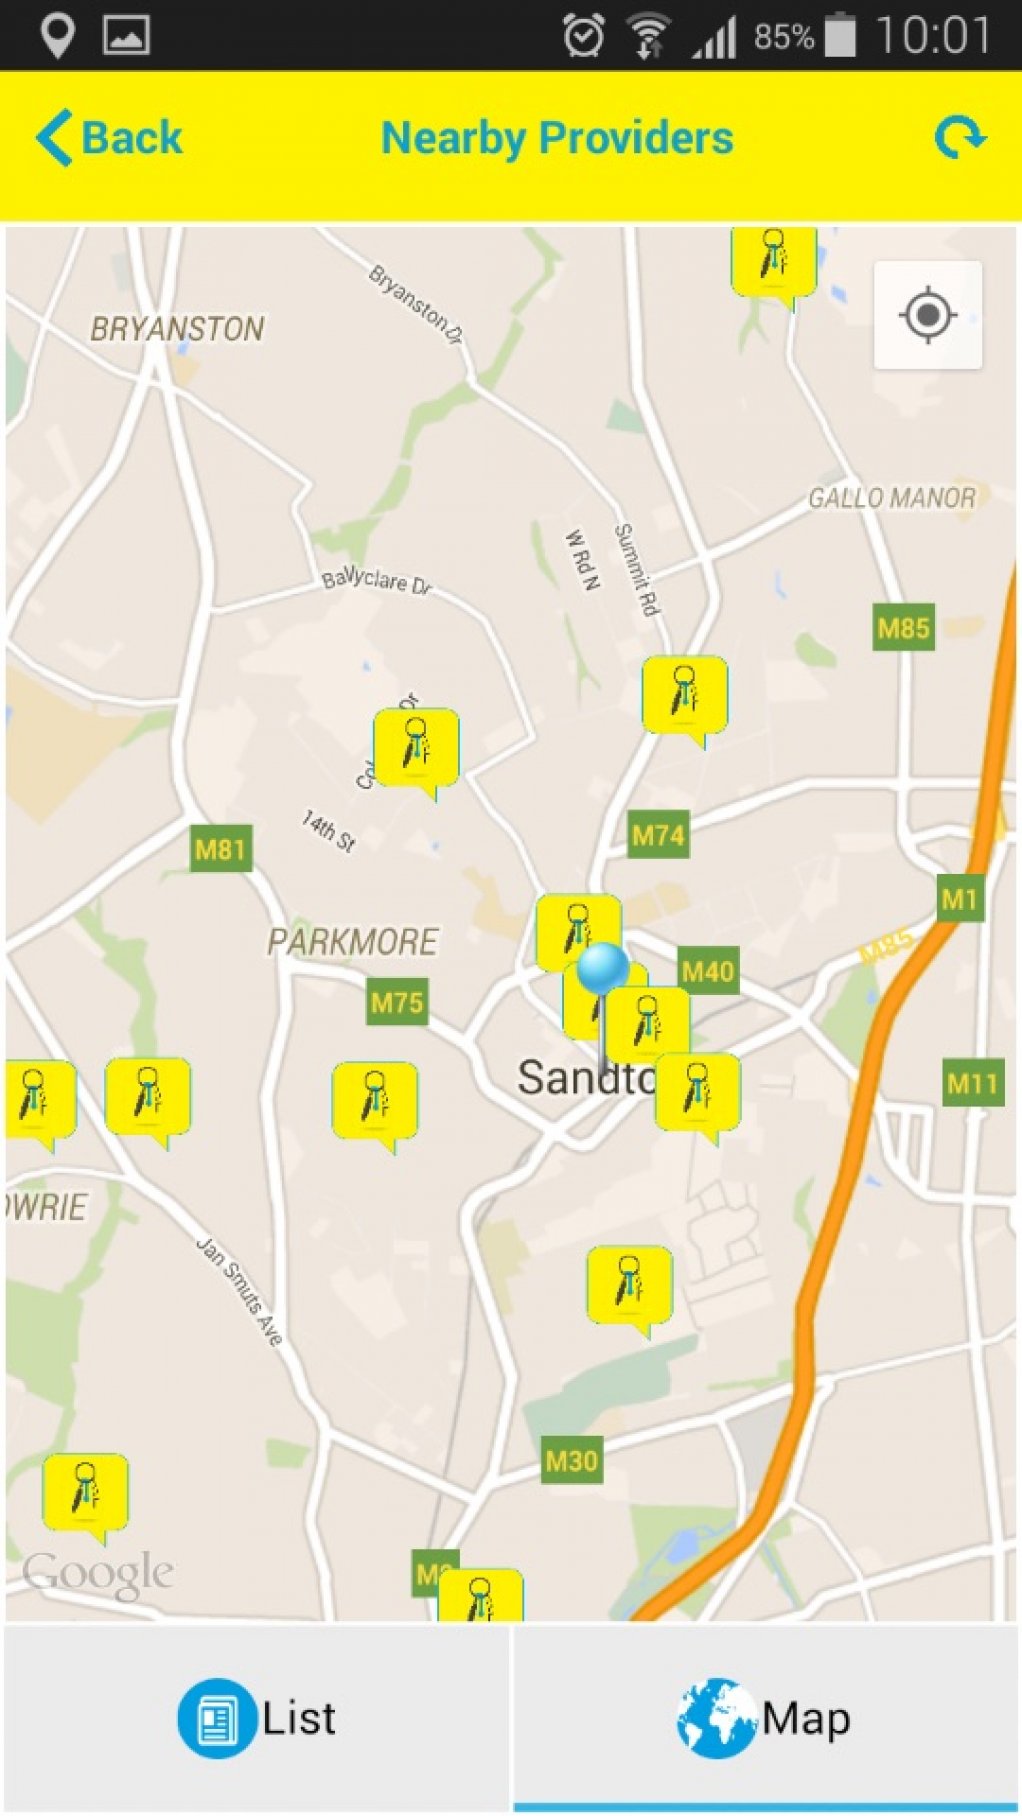 MAP VIEW
The app also provides a map where the closest service providers are displayed